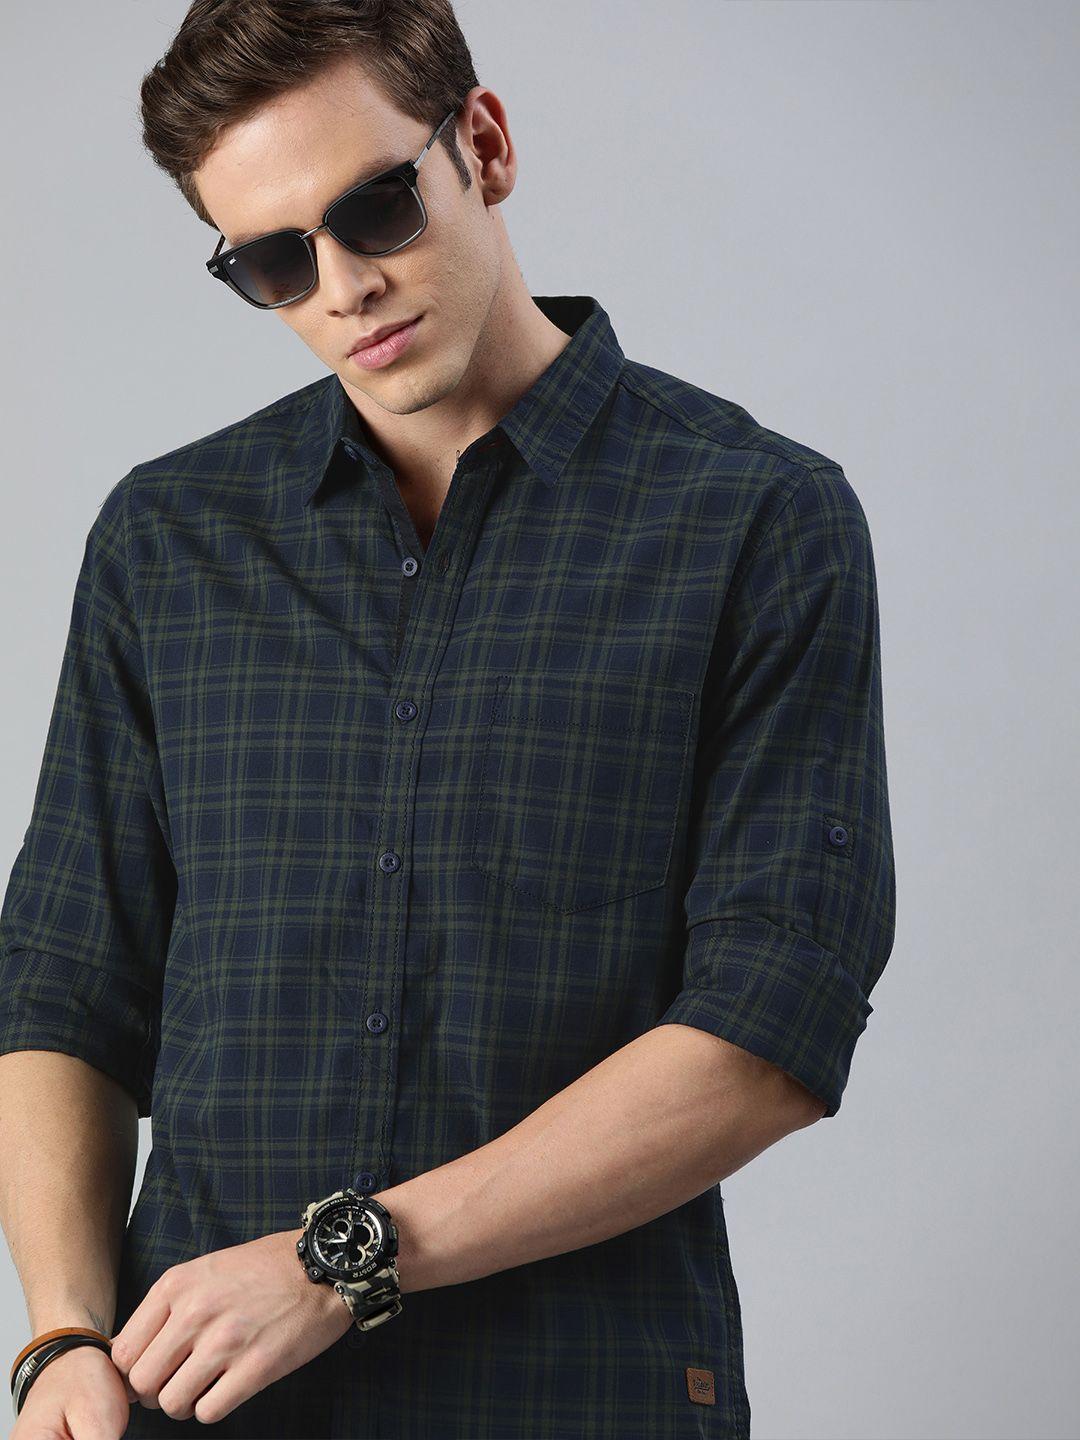 roadster-men-navy-blue-&-green-regular-fit-checked-casual-sustainable-shirt